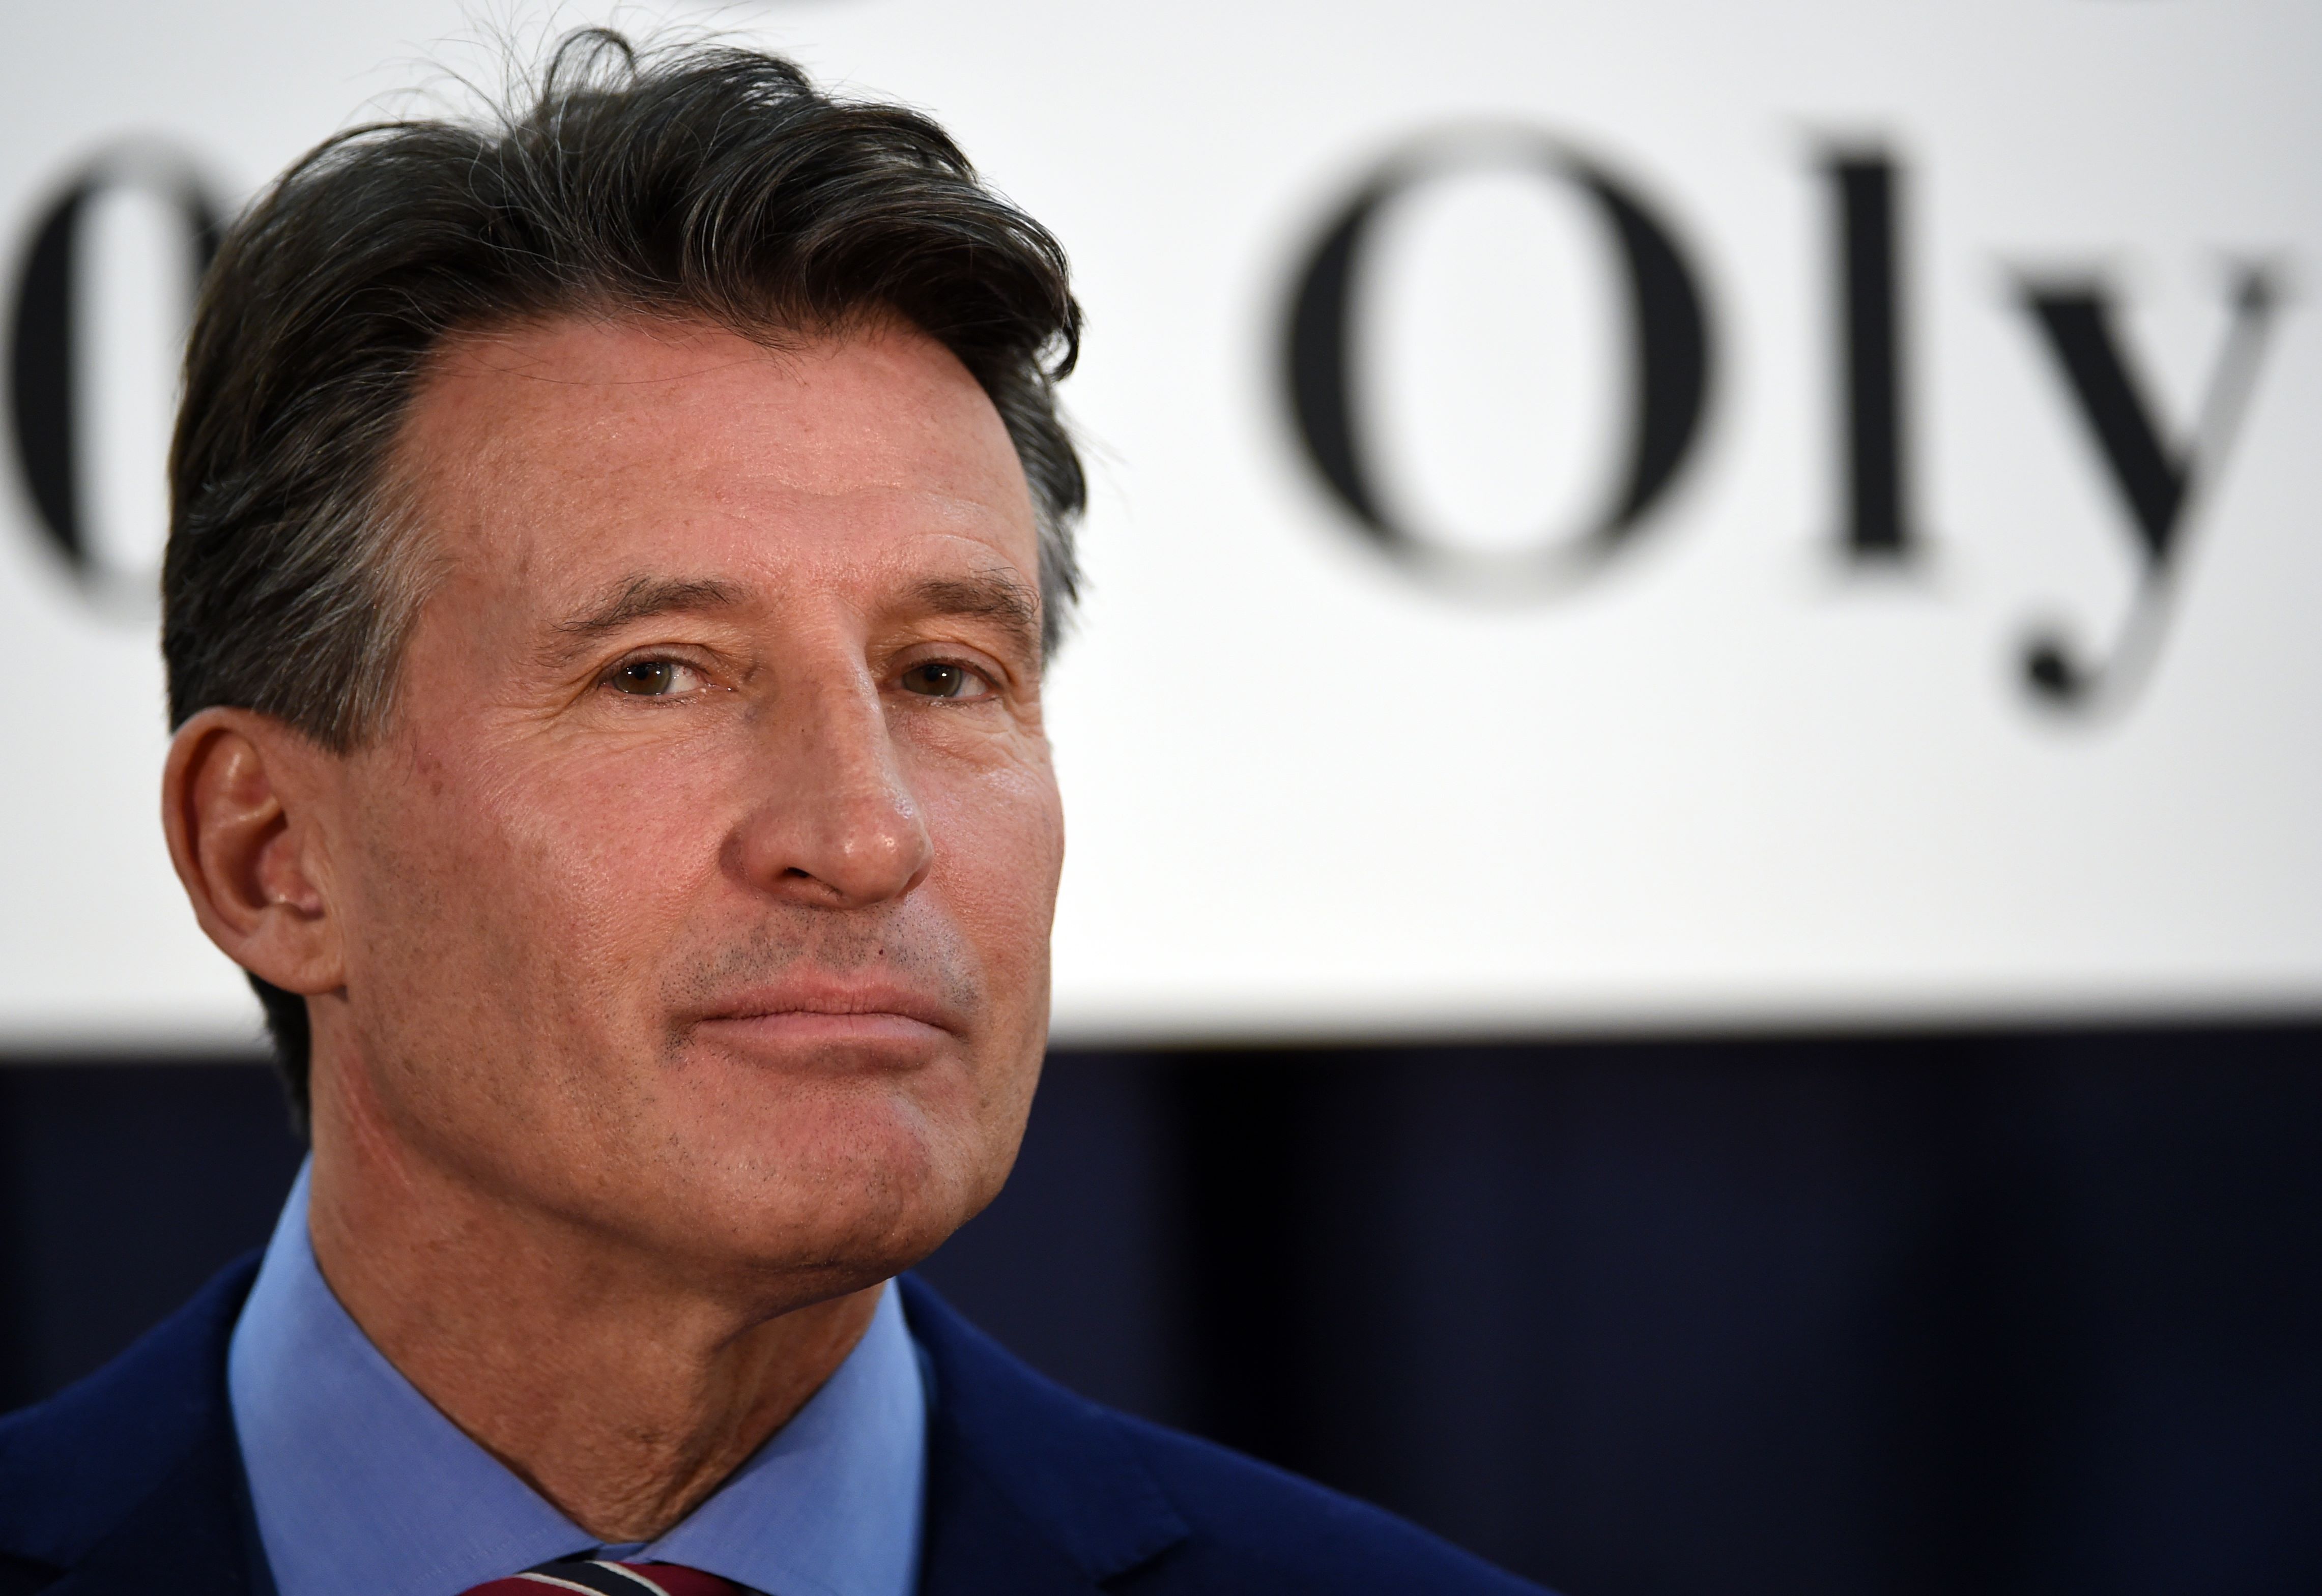 British Olympic Association chairman Sebastian Coe poses at a photo session after a signing ceremony for the British team's Tokyo 2020 Olympic games preparation camp in Tokyo on February 8, 2016. Beleaguered world athletics boss Coe admitted on February 8 there would be no quick fix as he battles to restore public trust in the crisis-hit sport. AFP PHOTO / TOSHIFUMI KITAMURA